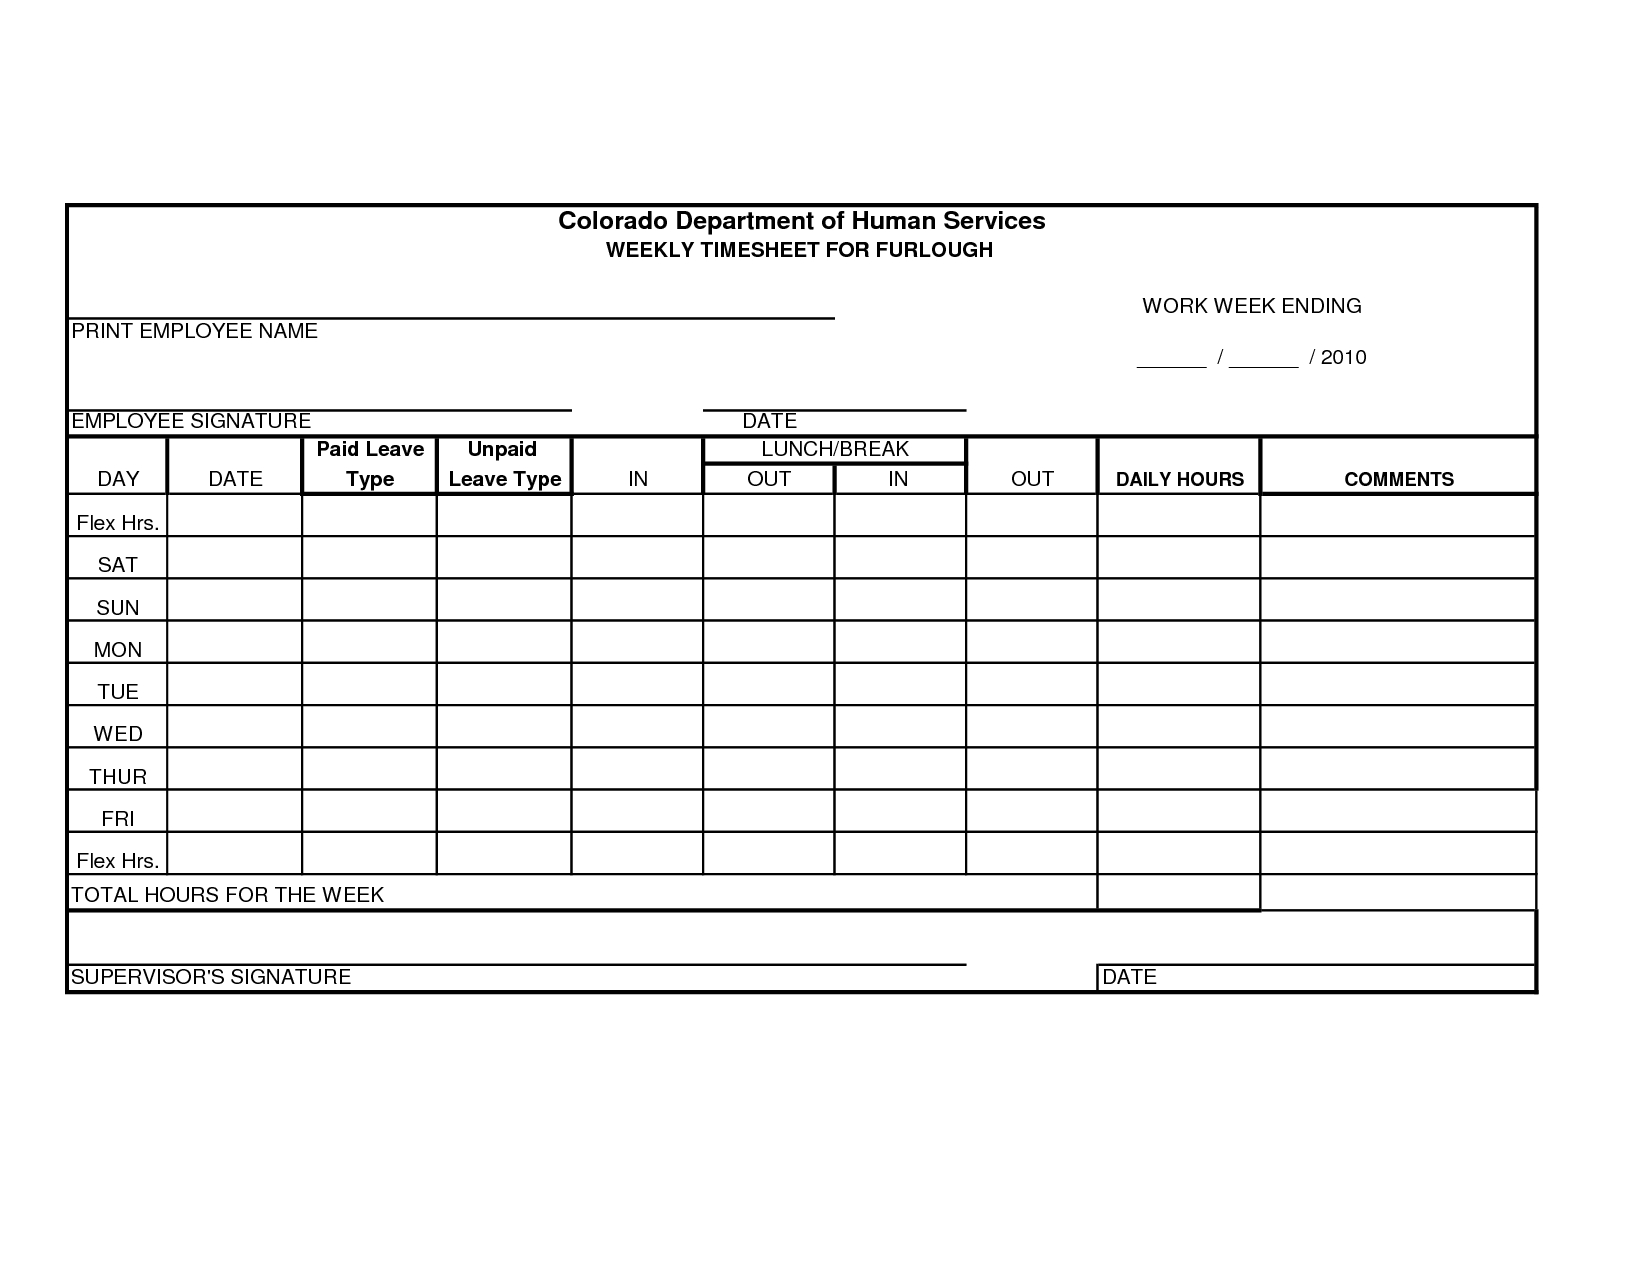 Free Printable Time Sheets Forms | Furlough Weekly Time Sheet - Free Printable Time Sheets Forms